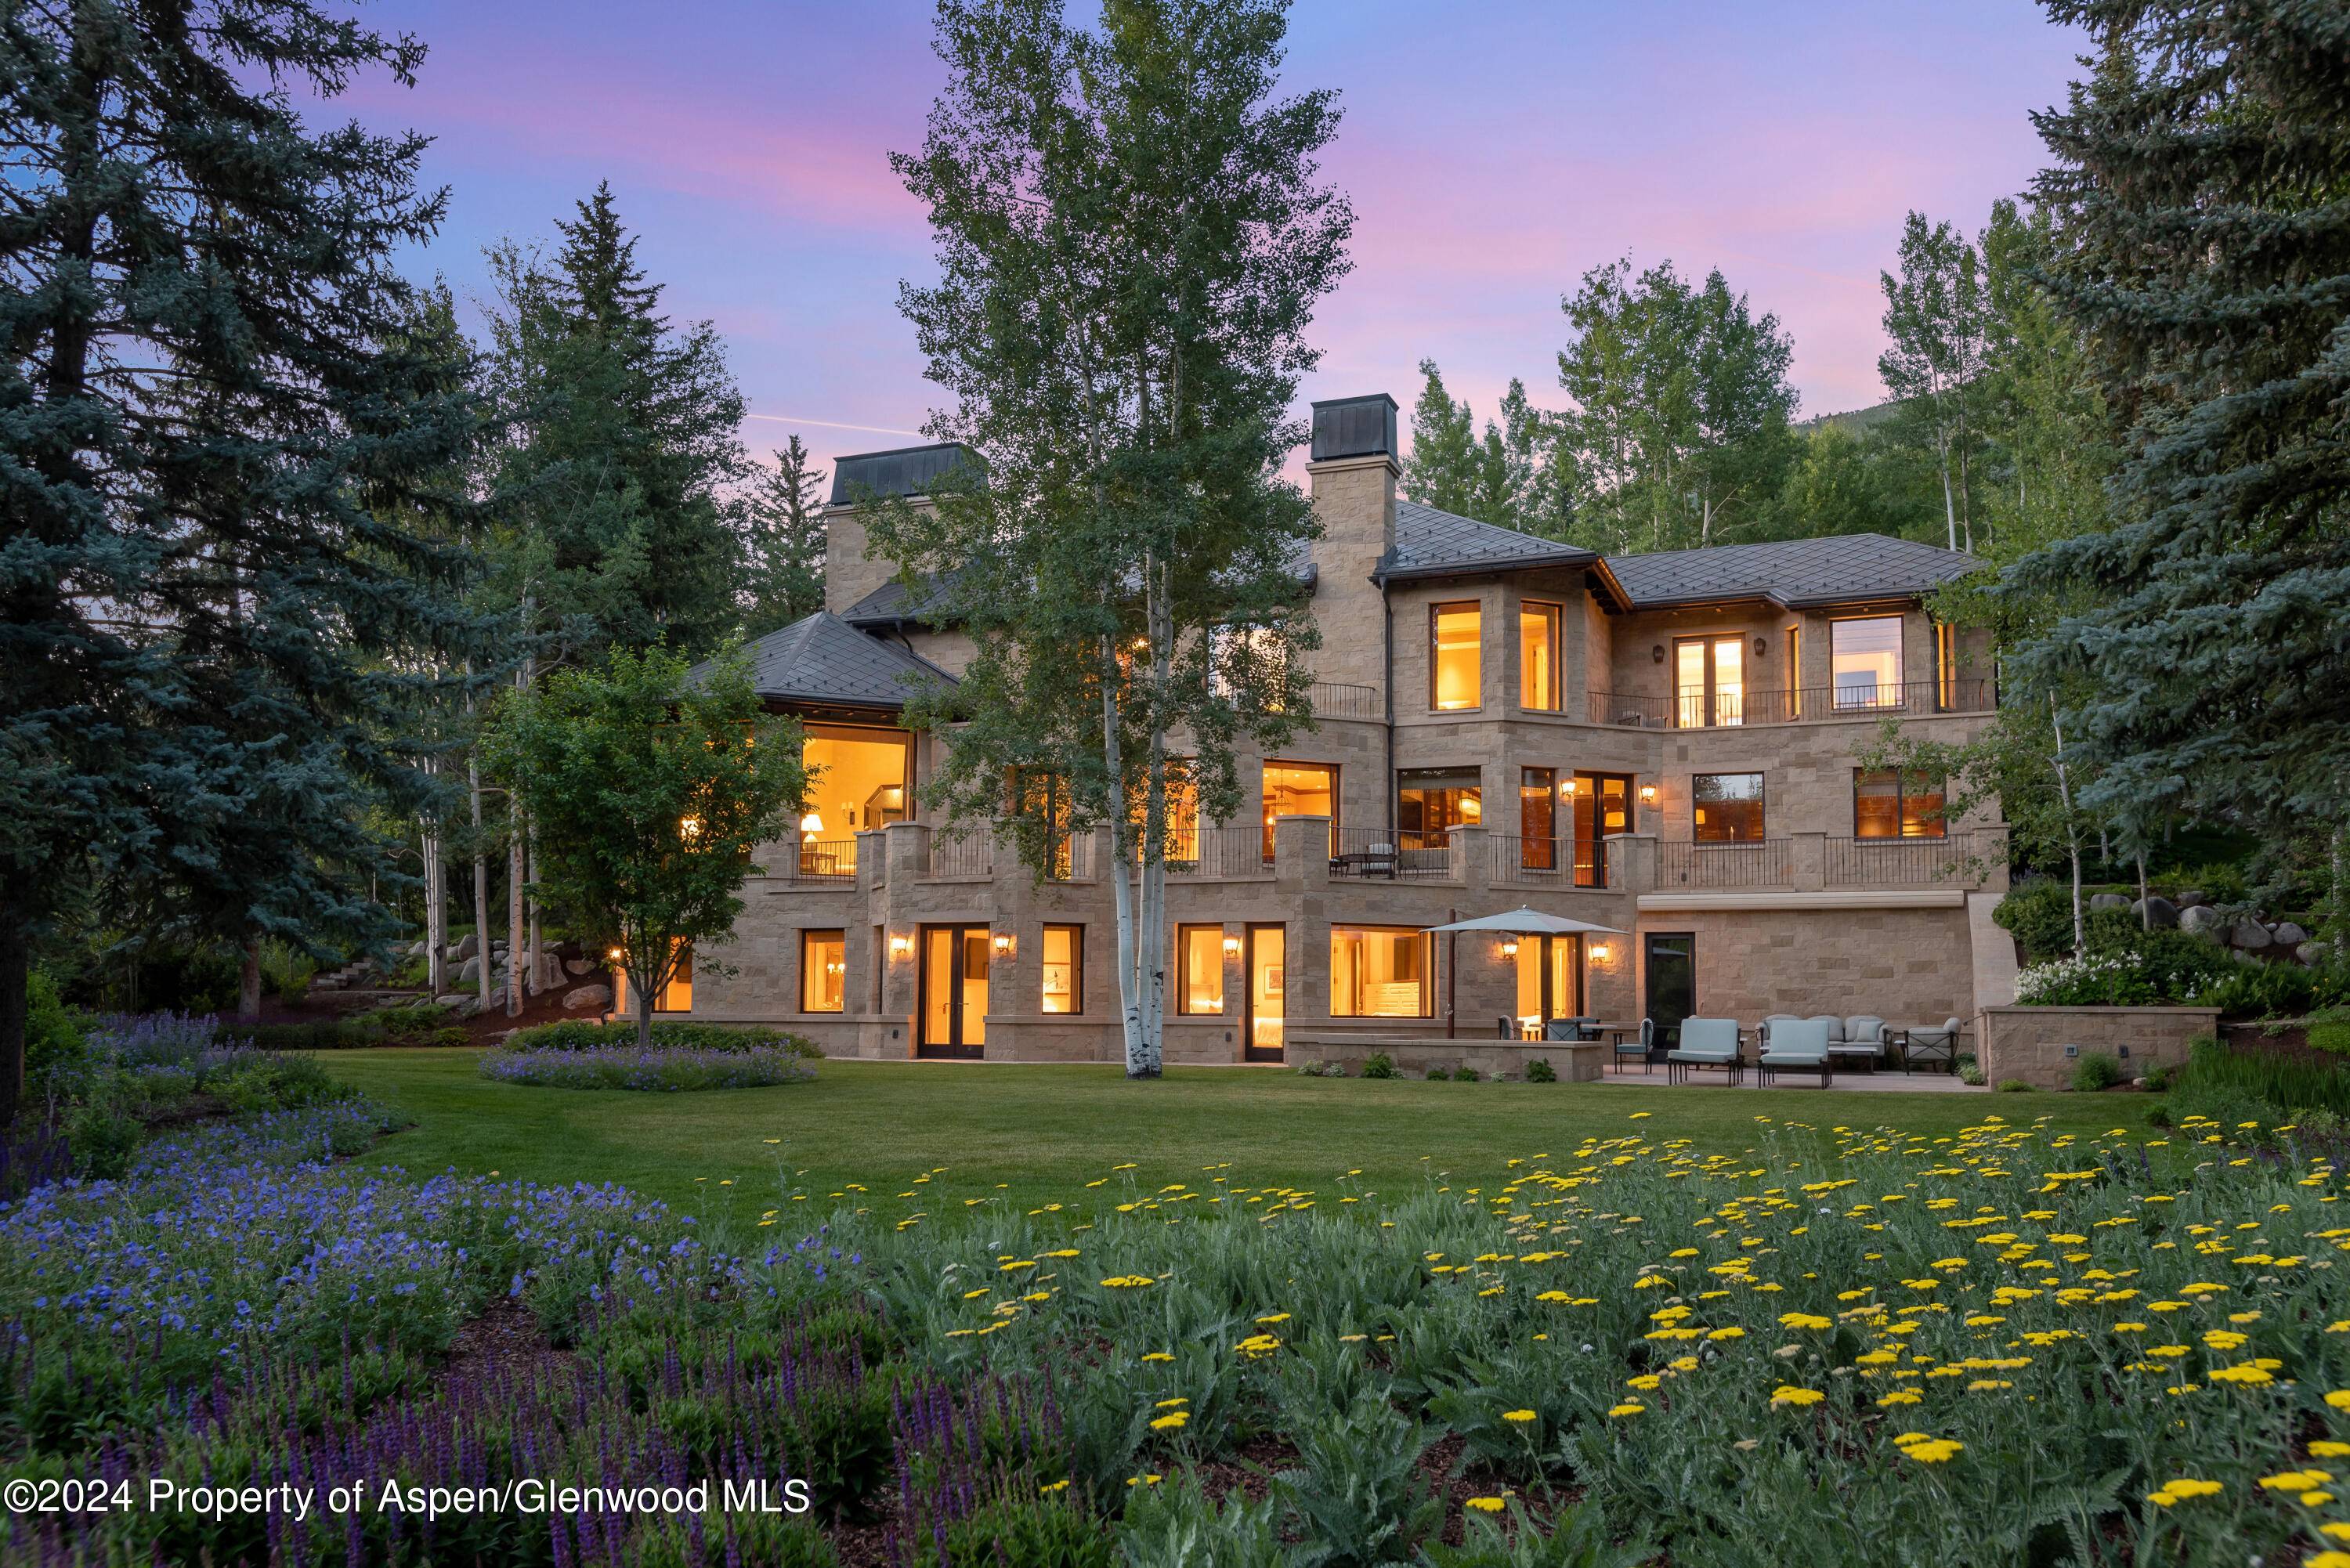 One of the finest homes ever built in Aspen.